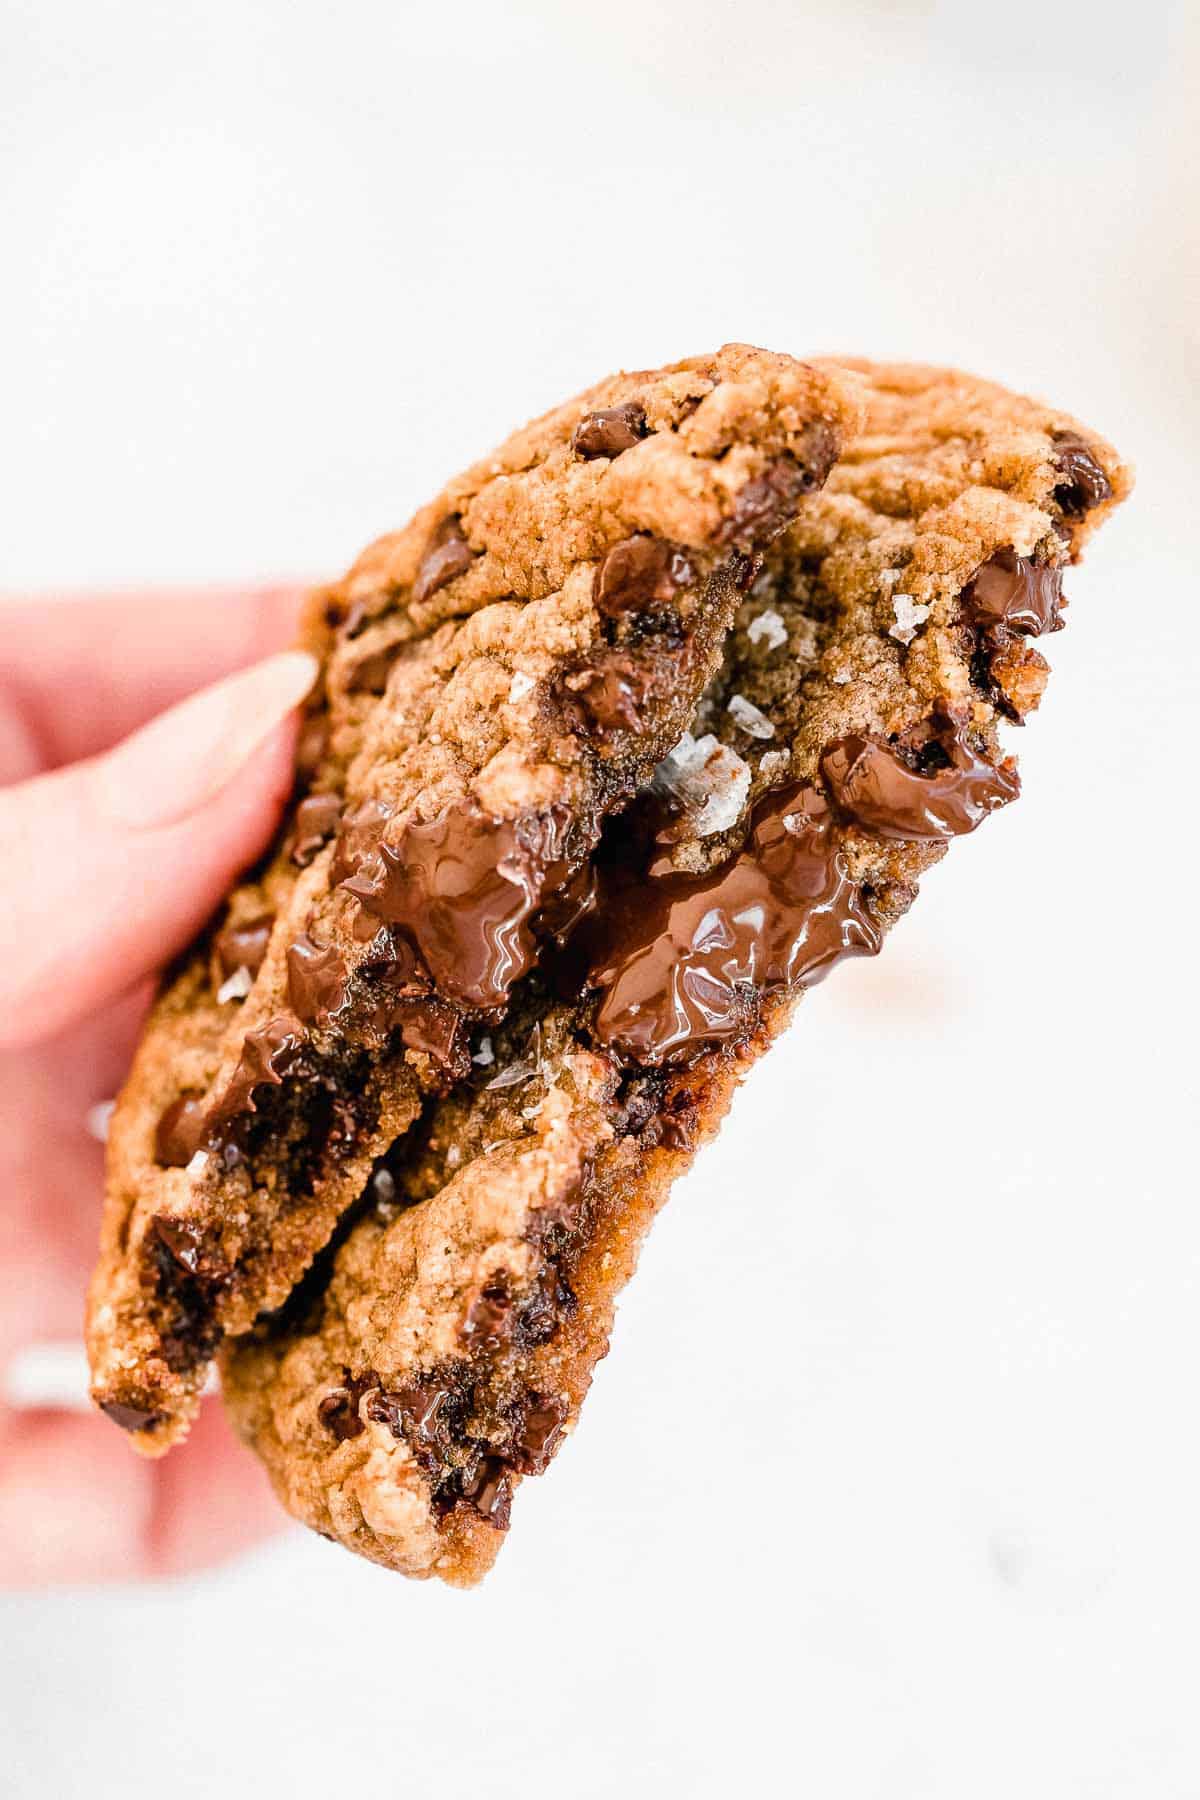 peanut butter cookie ripped in half with melted chocolate chips